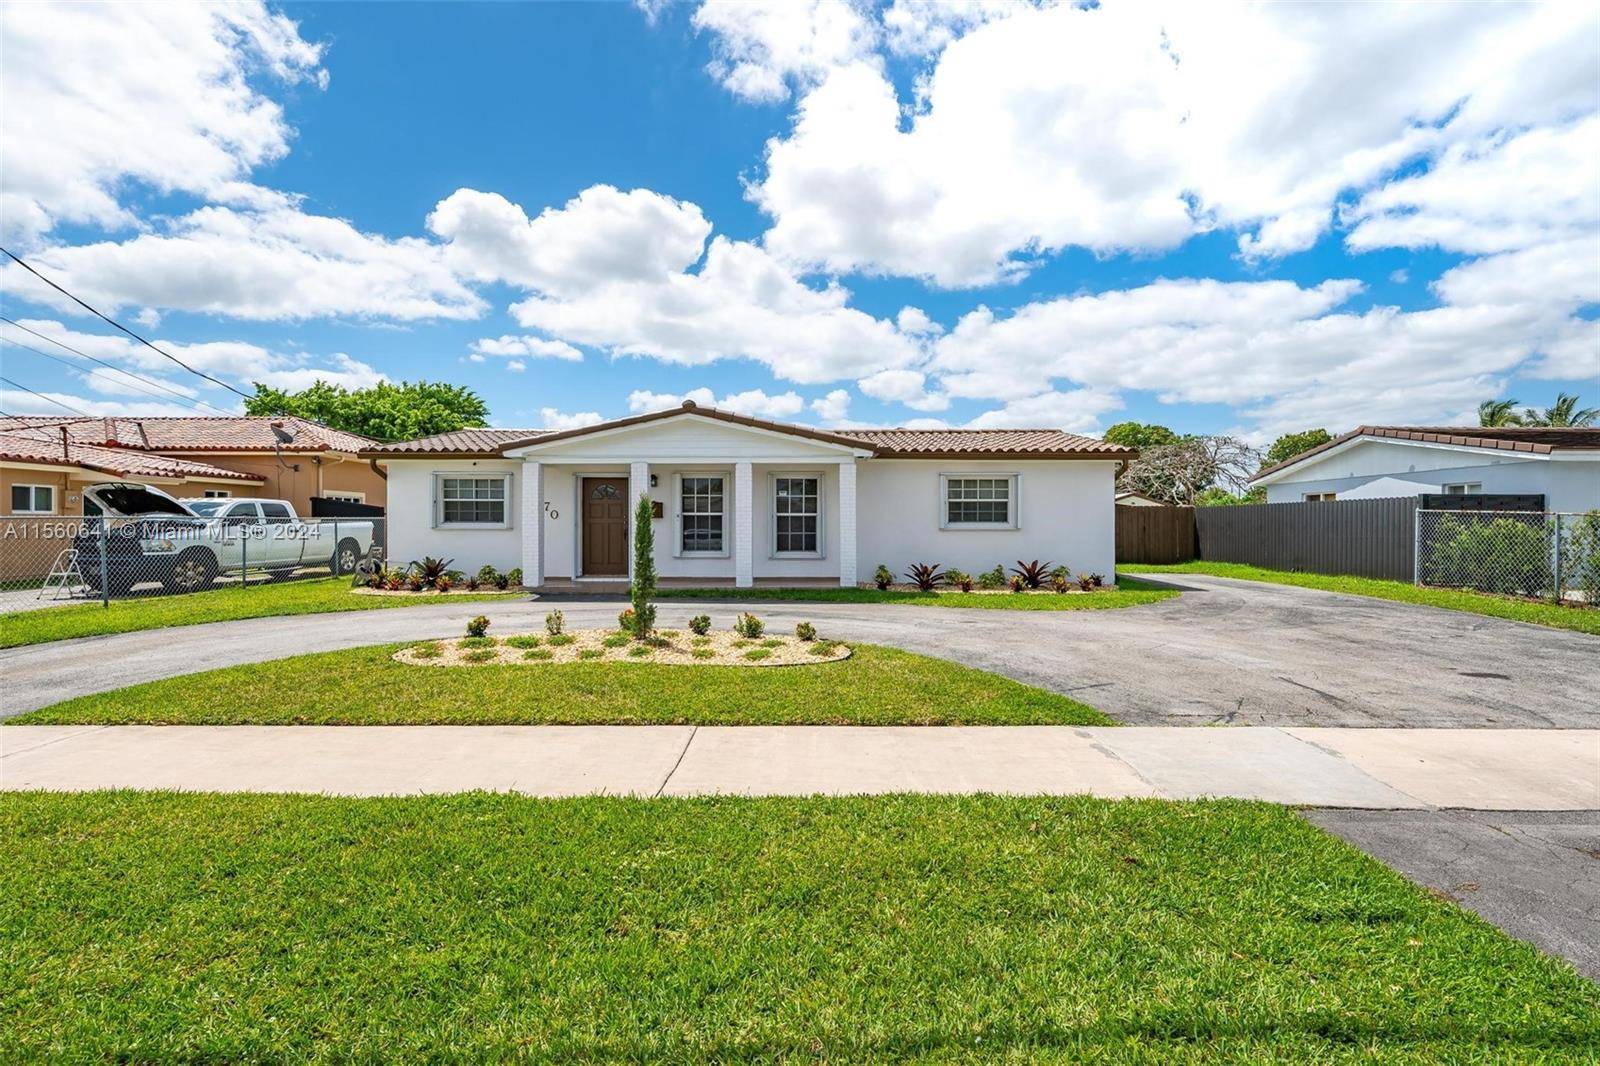 Situated in one of Miami's hidden gems neighborhoods, this homey 3 bedroom 2 bathroom pool home is exactly what you have been looking for.